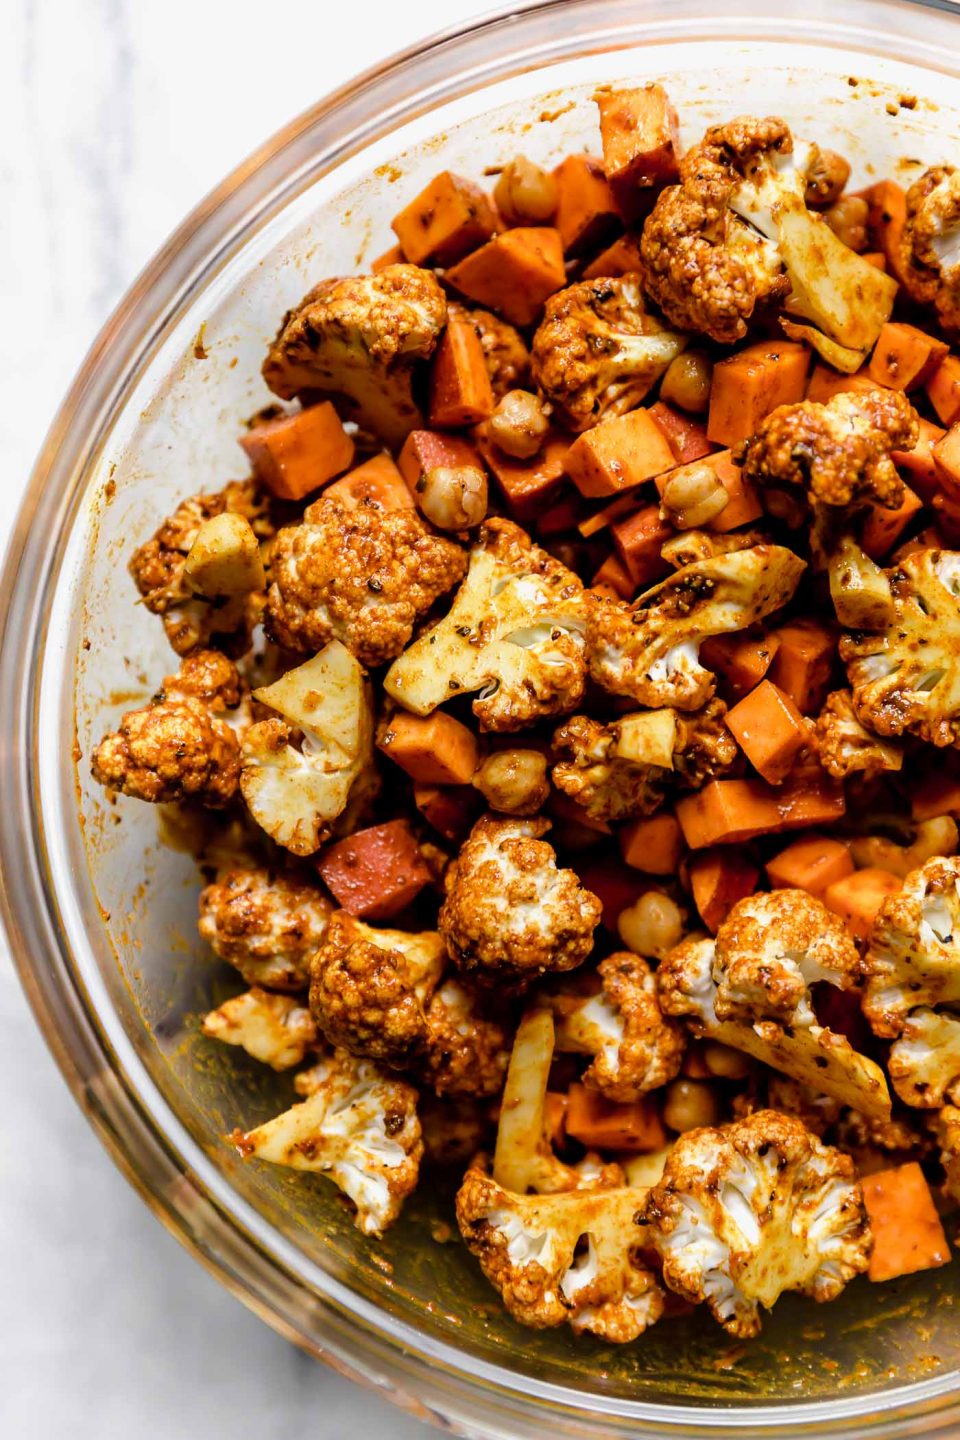 Sweet potato, cauliflower and chickpeas are tossed in shawarma marinade inside of a large glass bowl.